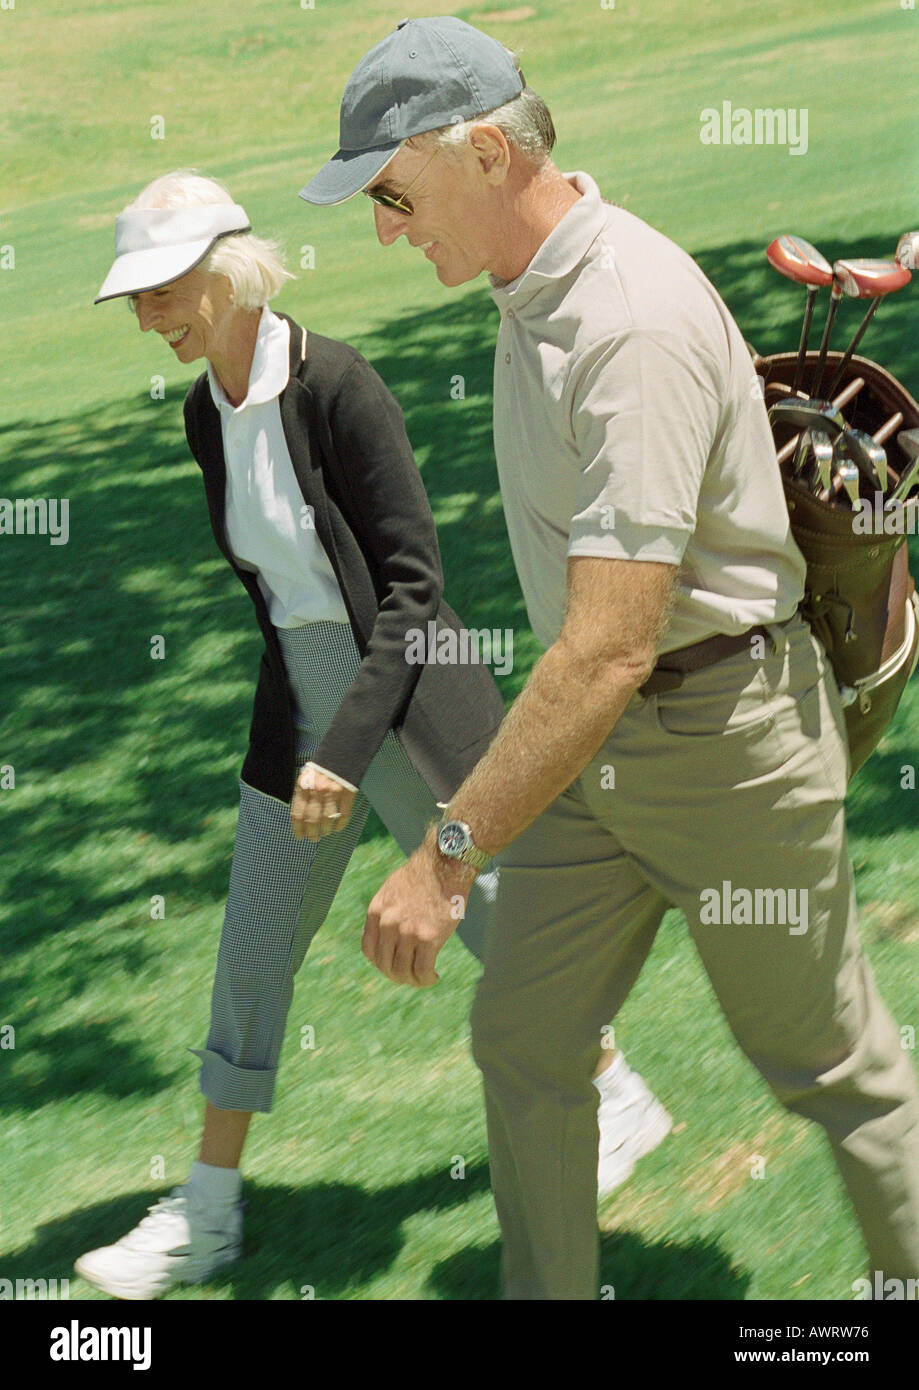 Man and woman on green, man carrying golf clubs Banque D'Images